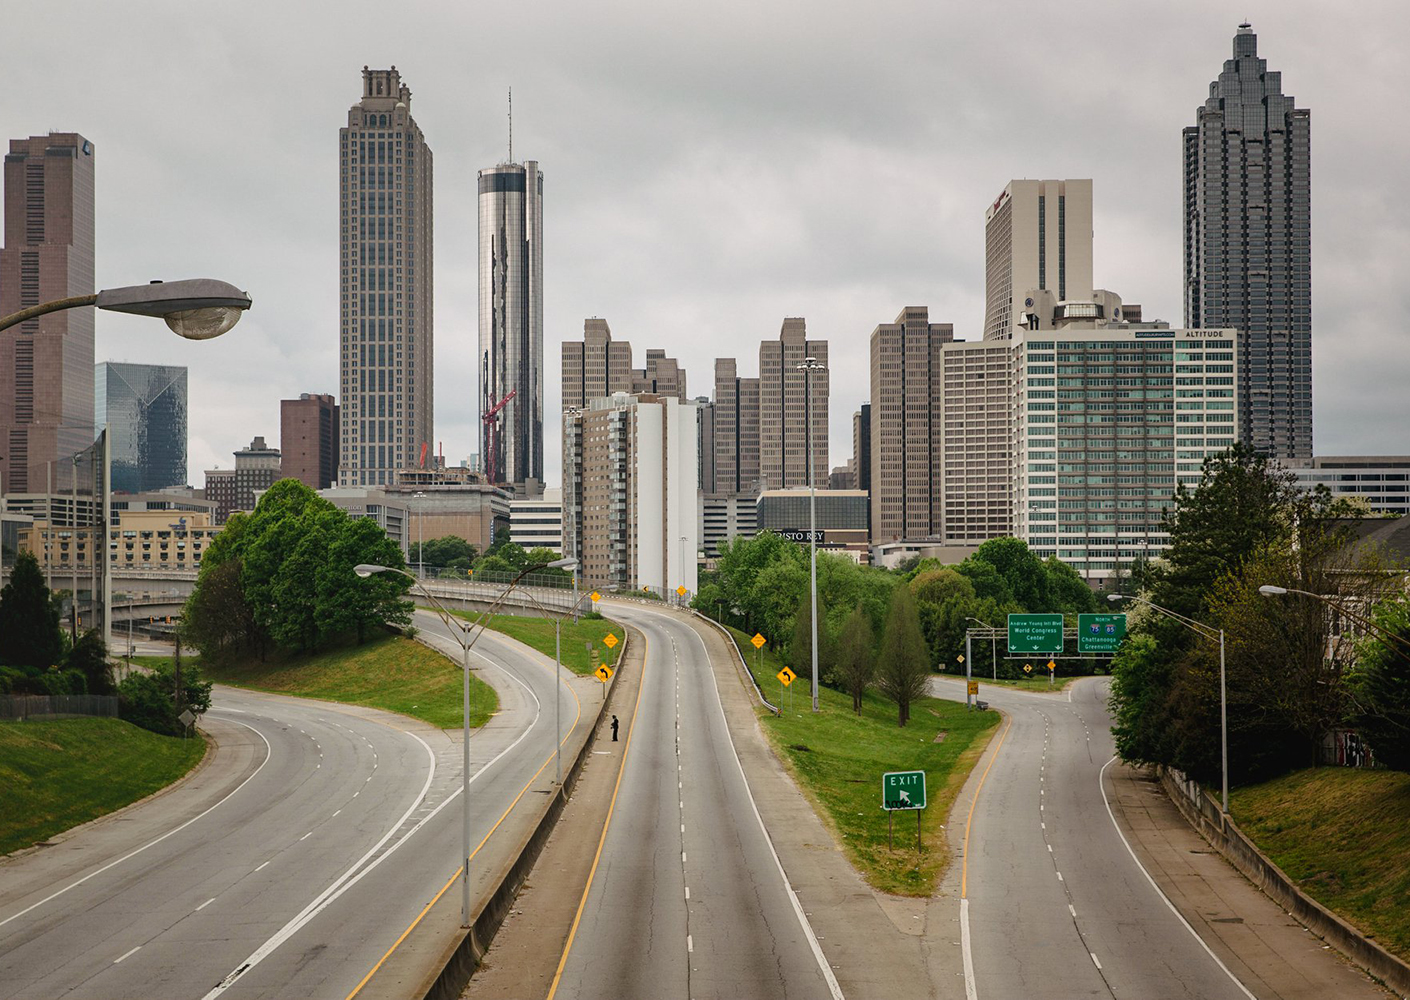 Atlanta on Wednesday, April 8, 2020 at 12:52pm Credit: Dustin Chambers